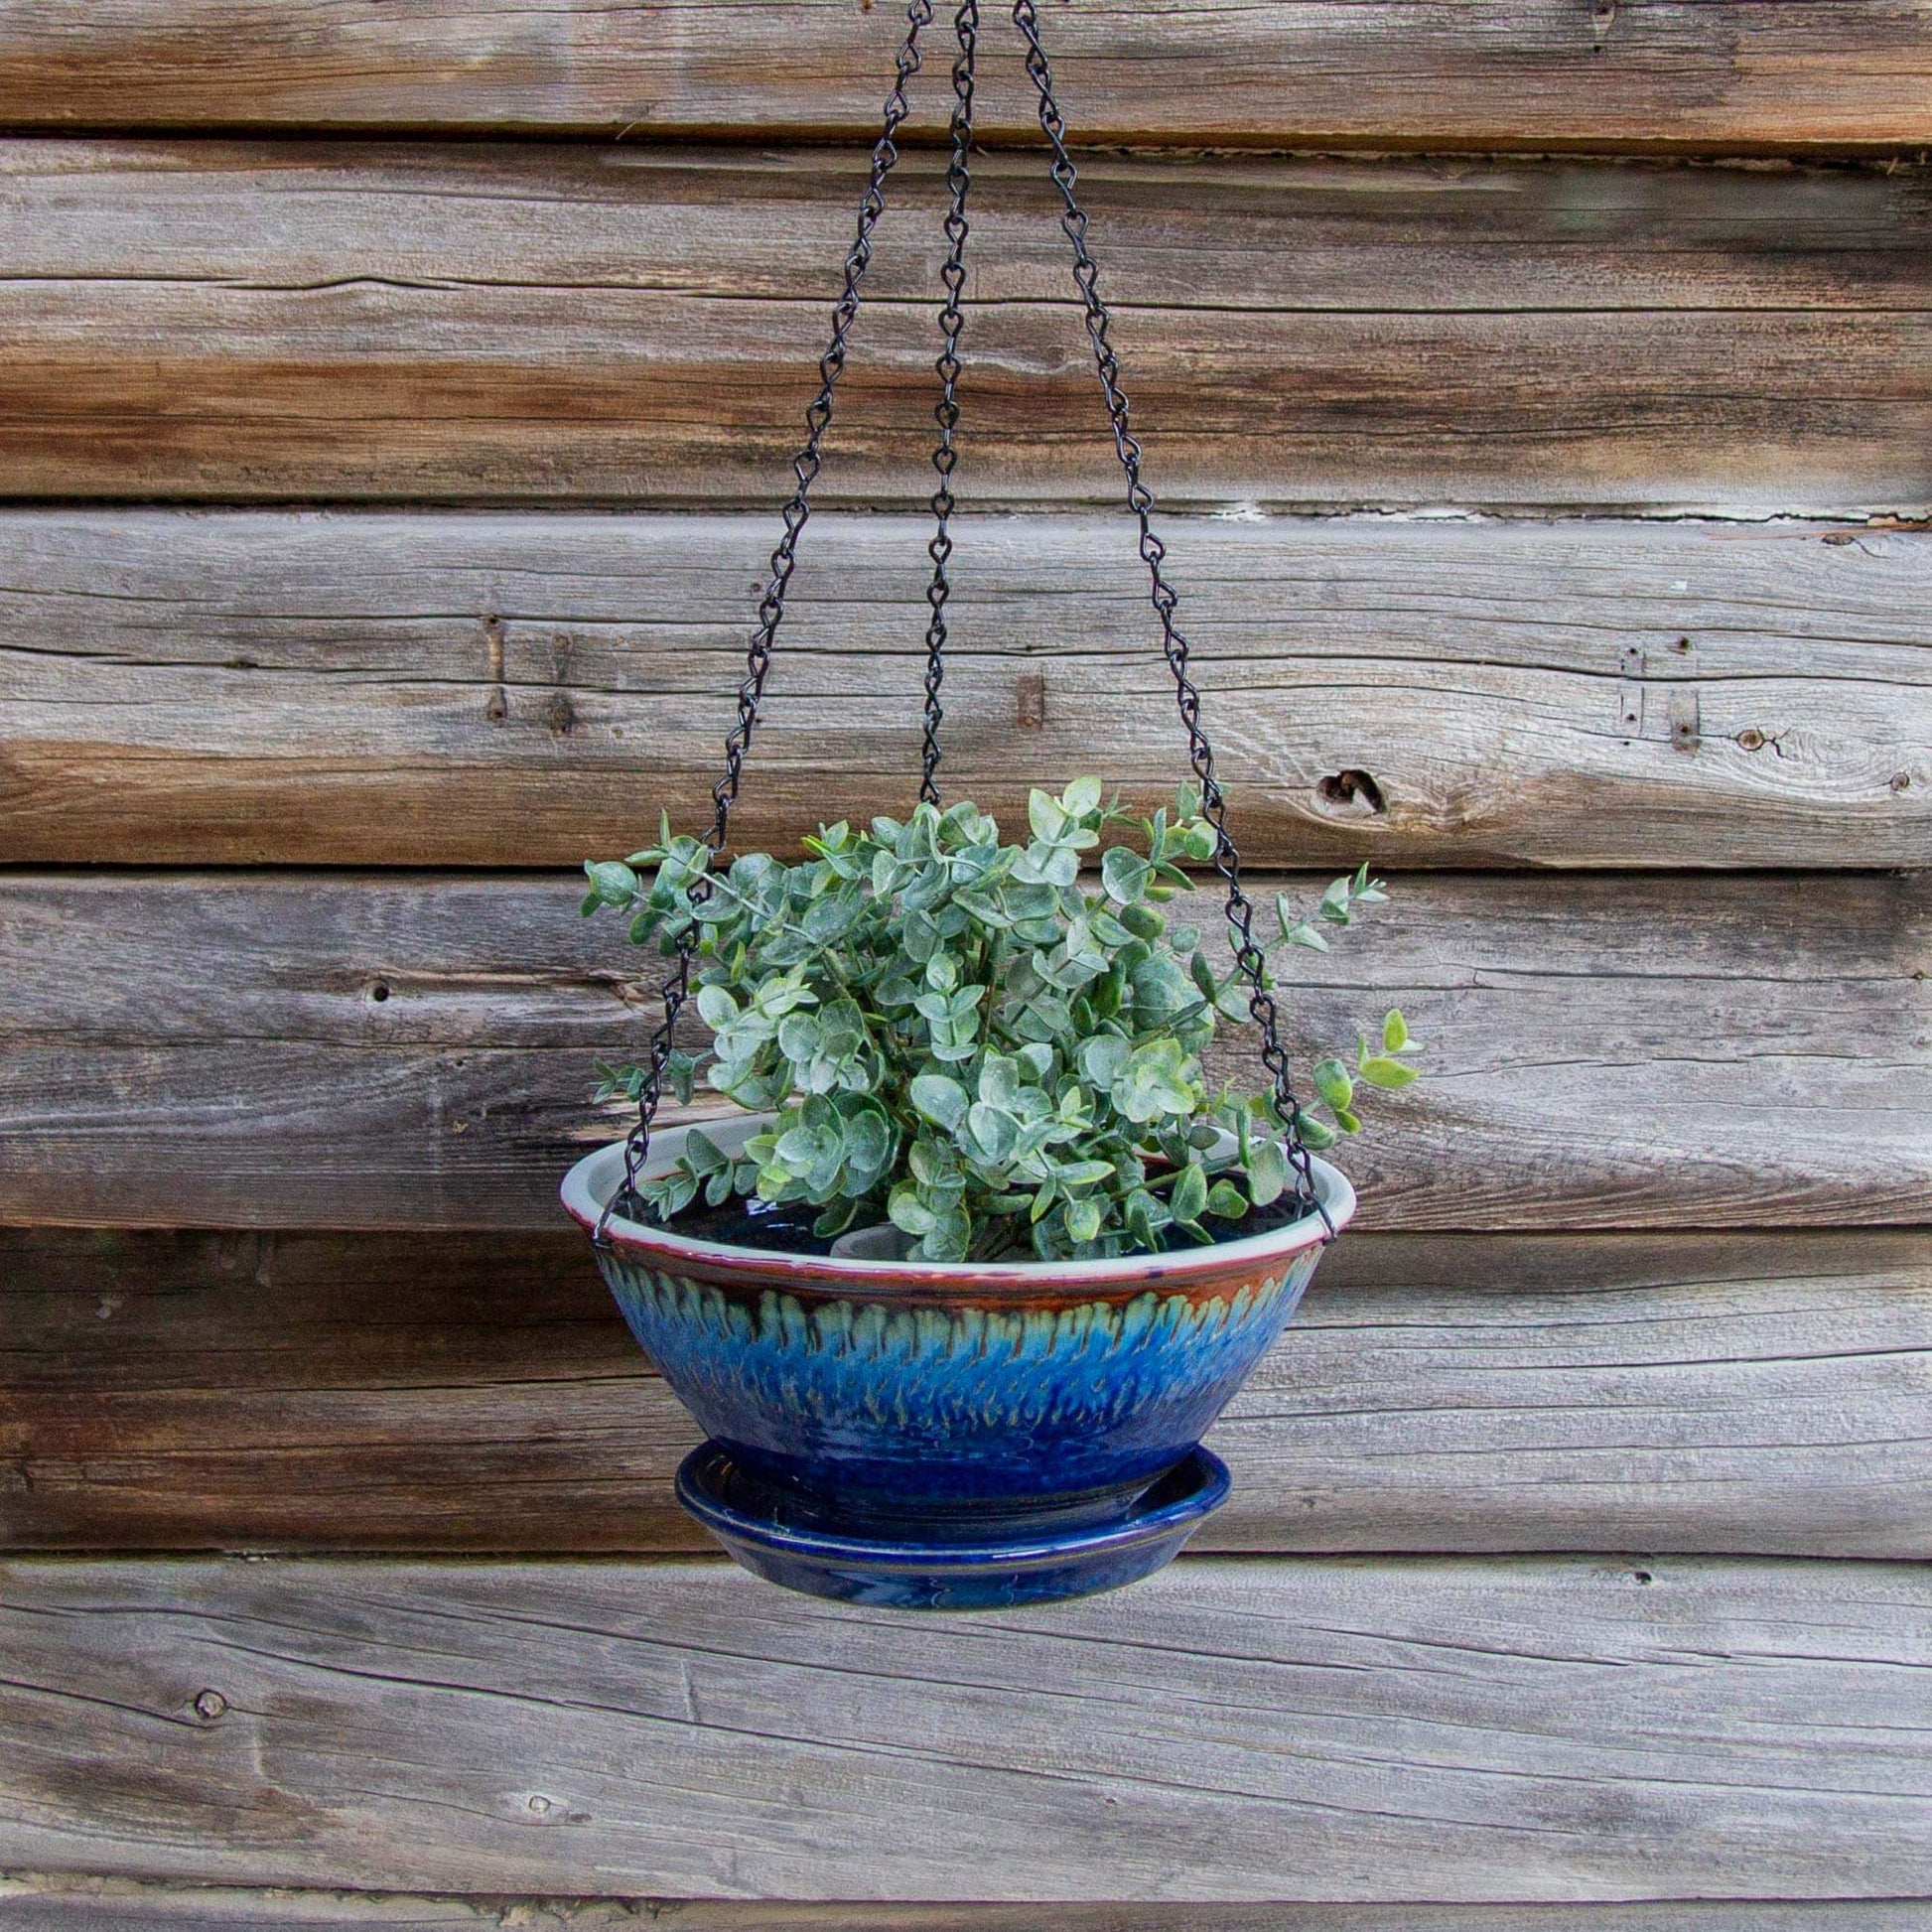 Handmade Pottery 9-1/2 Inch Hanging Planter in Blue Hamada pattern made by Georgetown Pottery in Maine